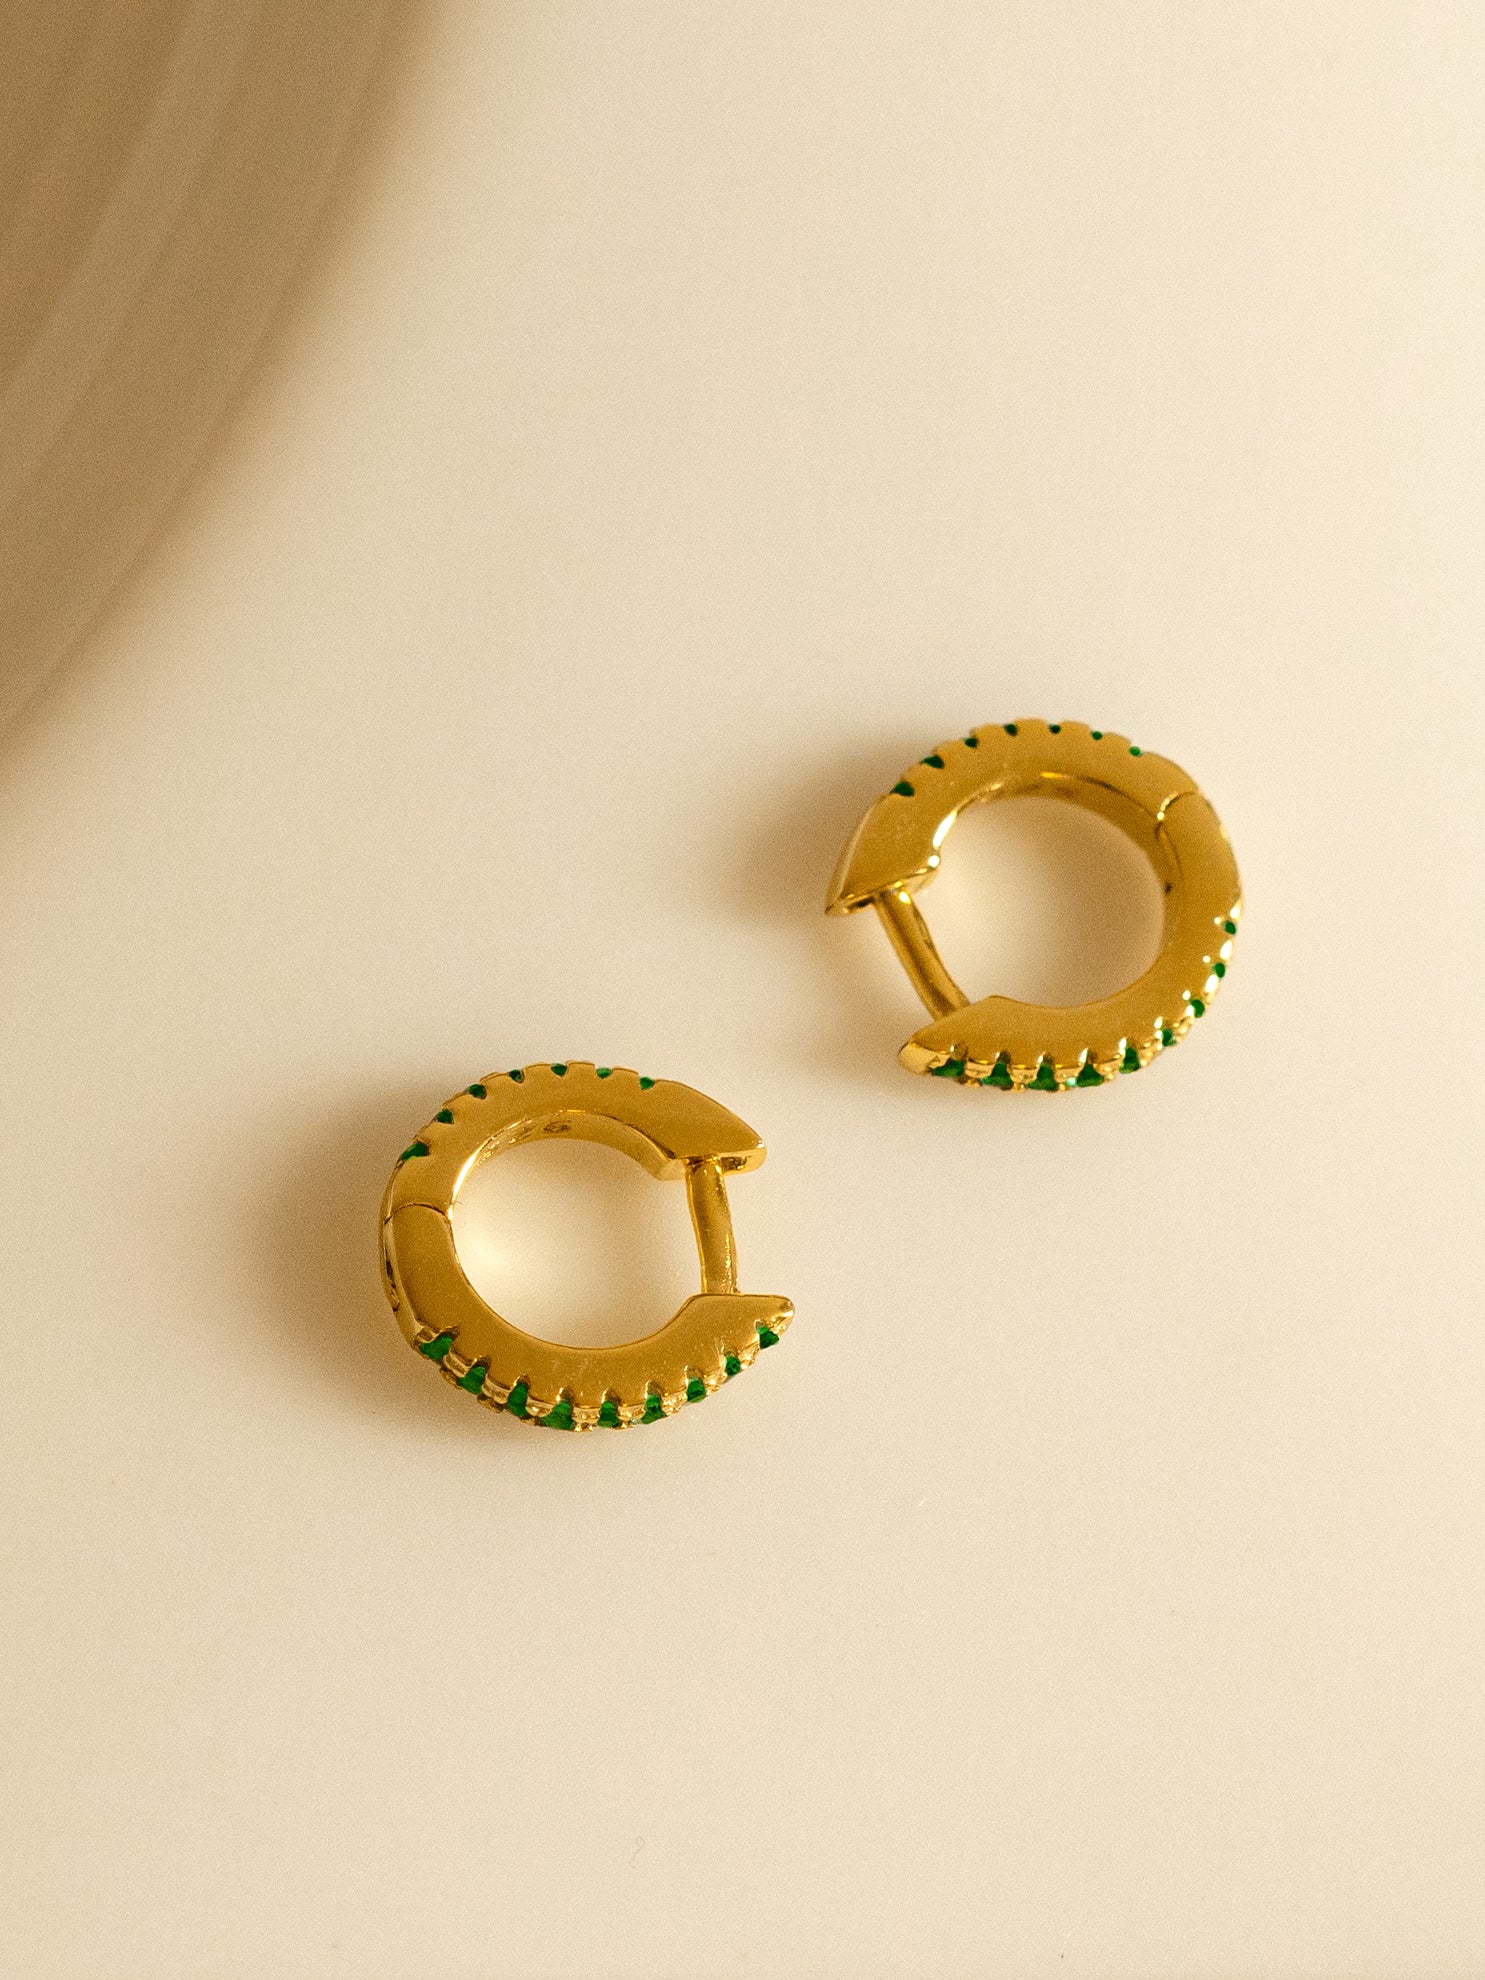 Gold Tiny Hoop Earrings With Green Stones For Helix, Upper Lobe, Tragus